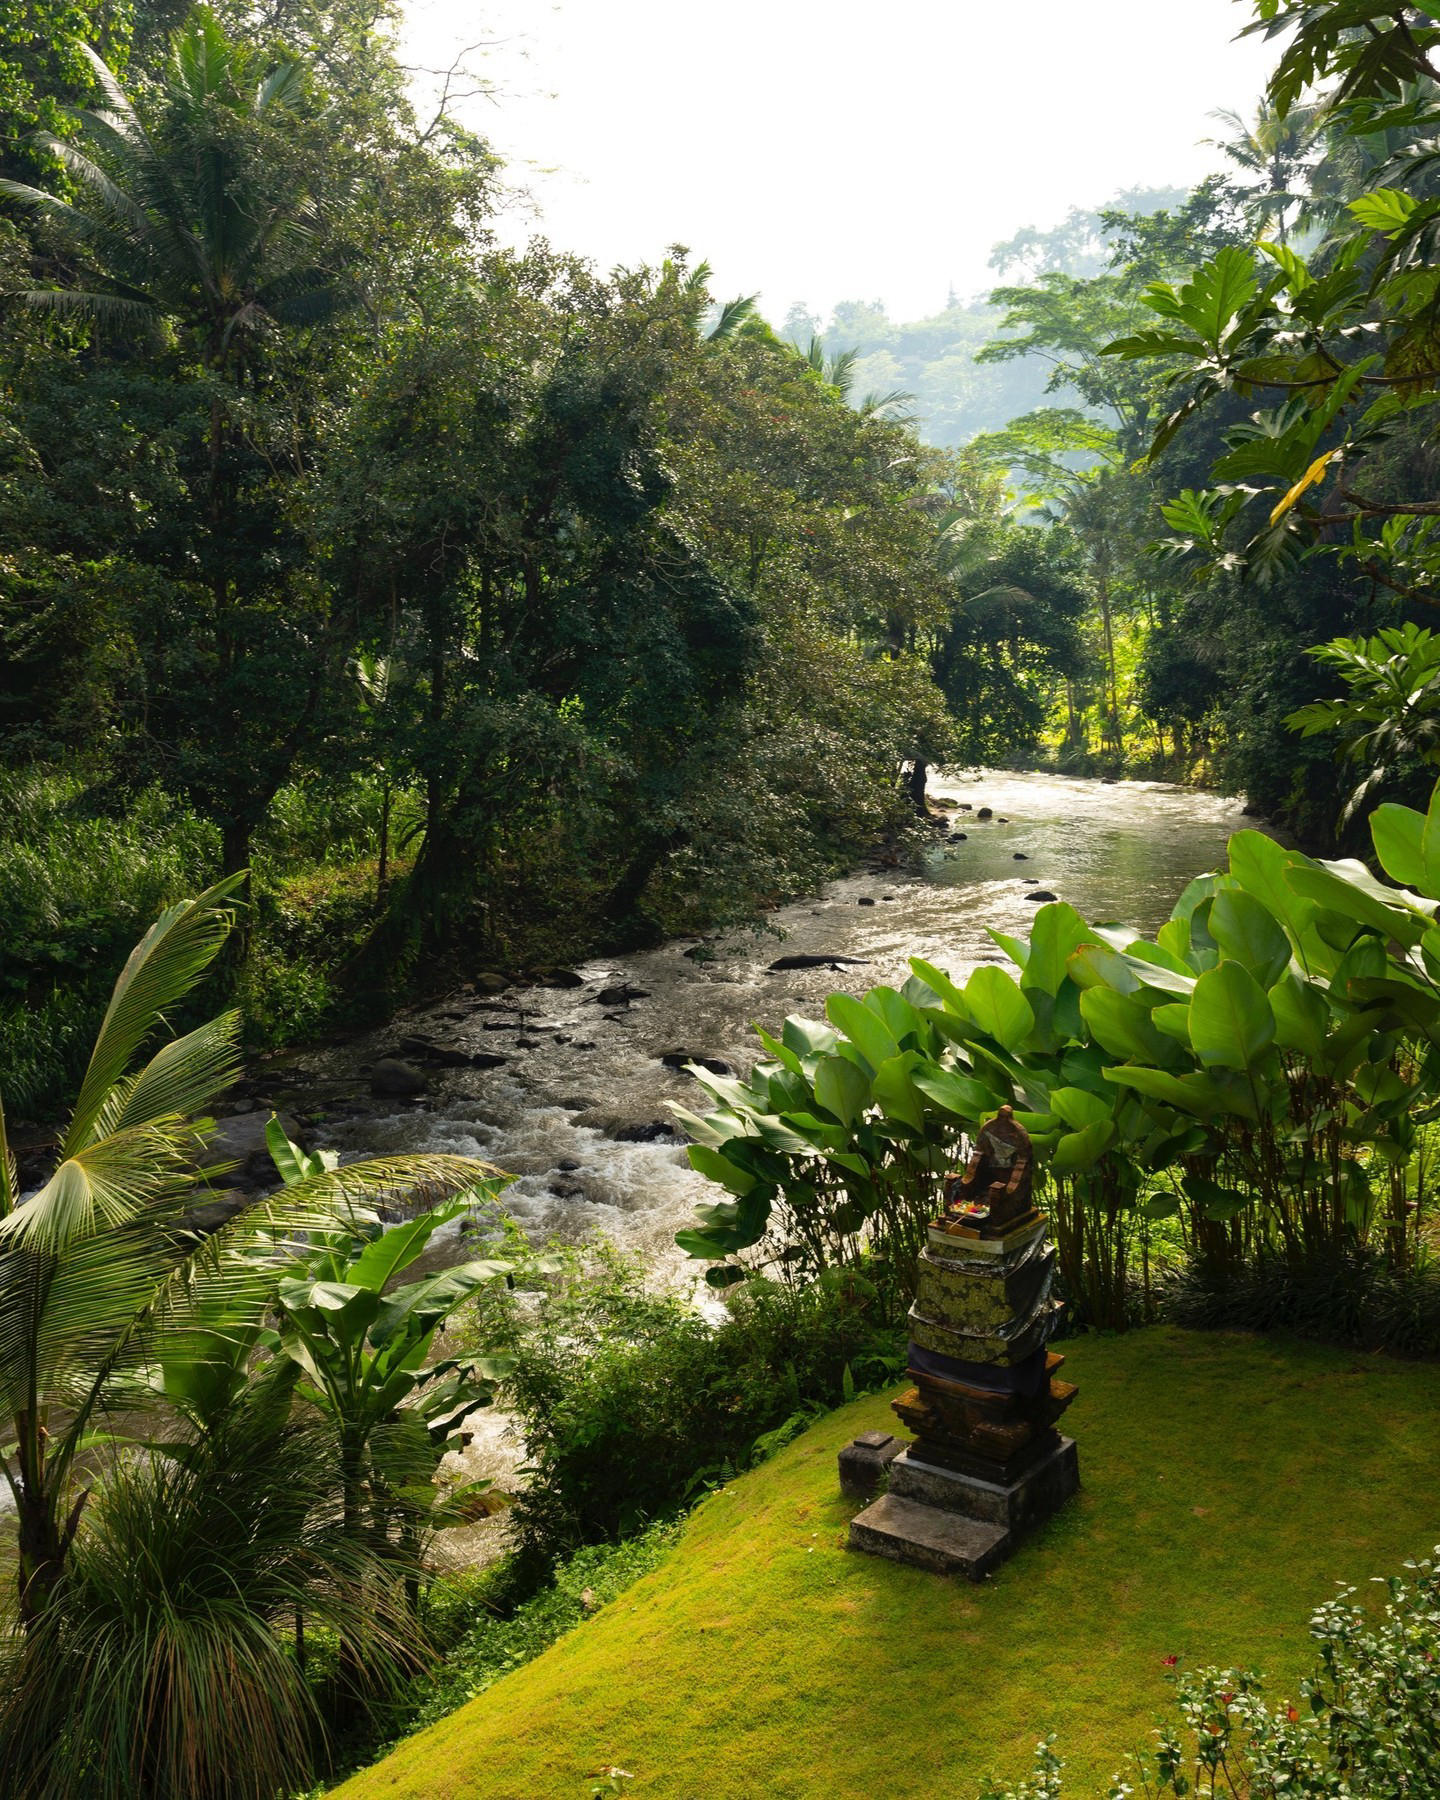 image  1 The Ayung River flows through the deepest of greens at #mandapareserve, defining each moment in our